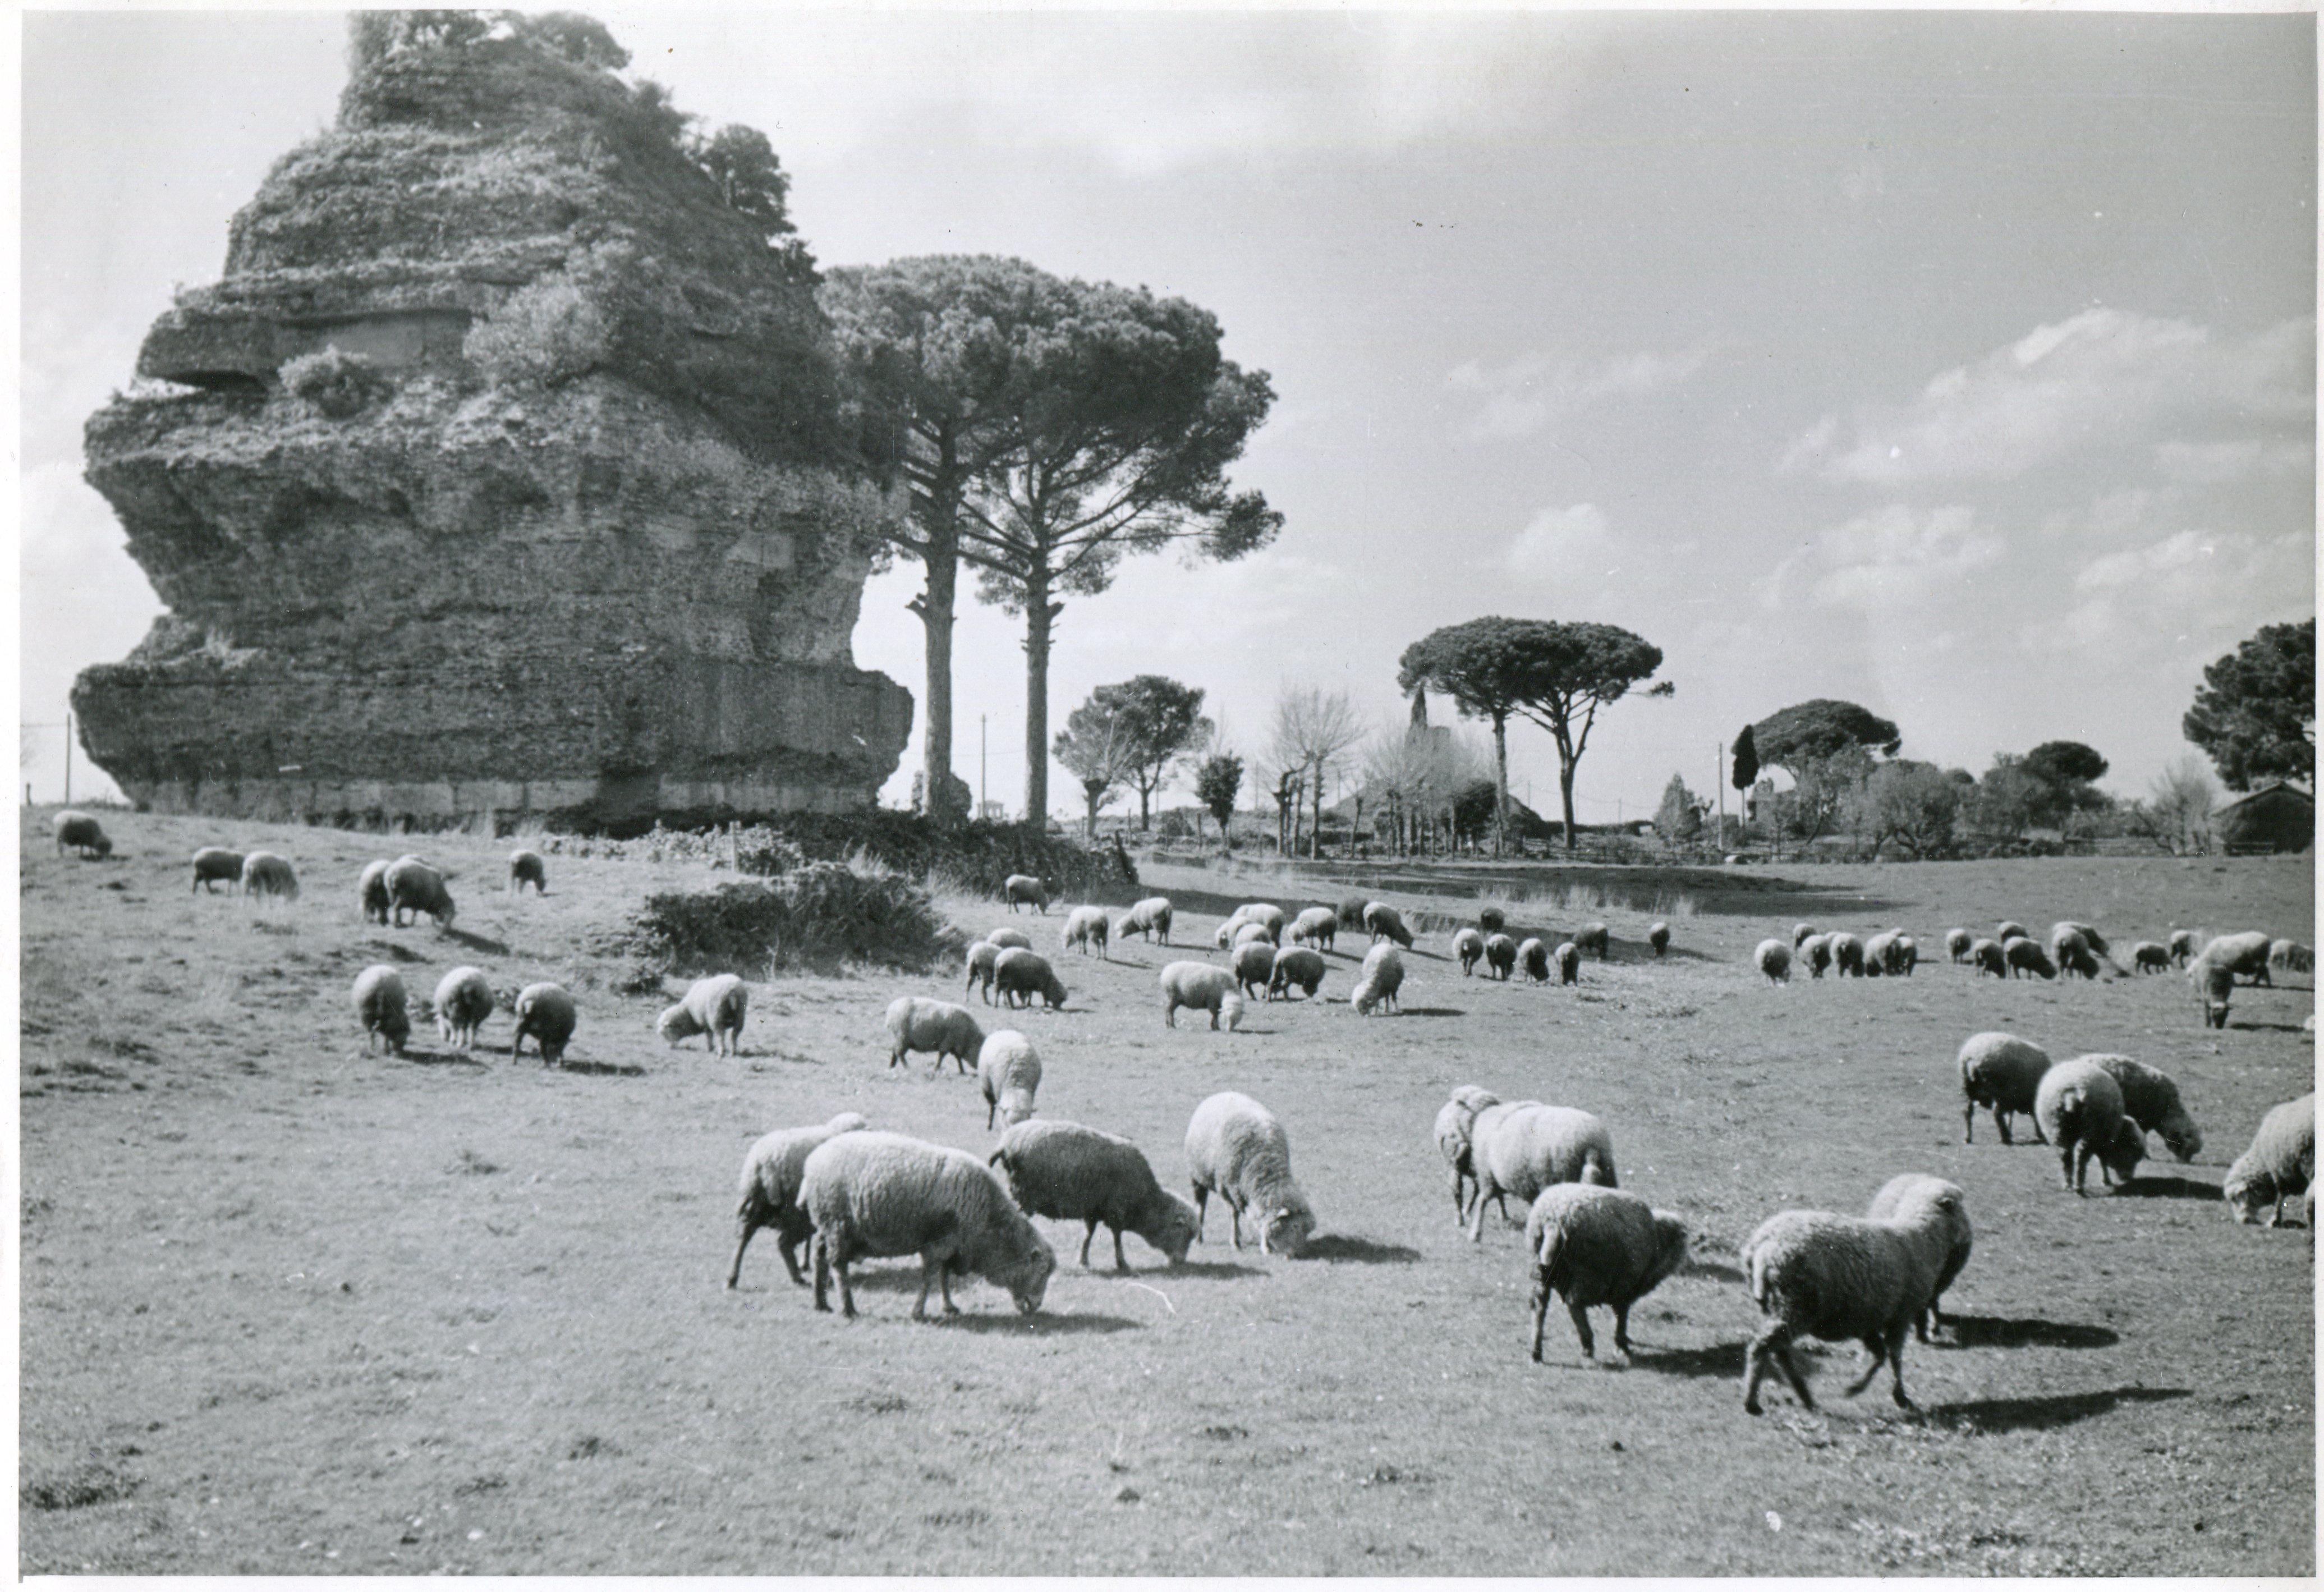 Erich Andres Black and White Photograph - Rome - Via Appia 1954